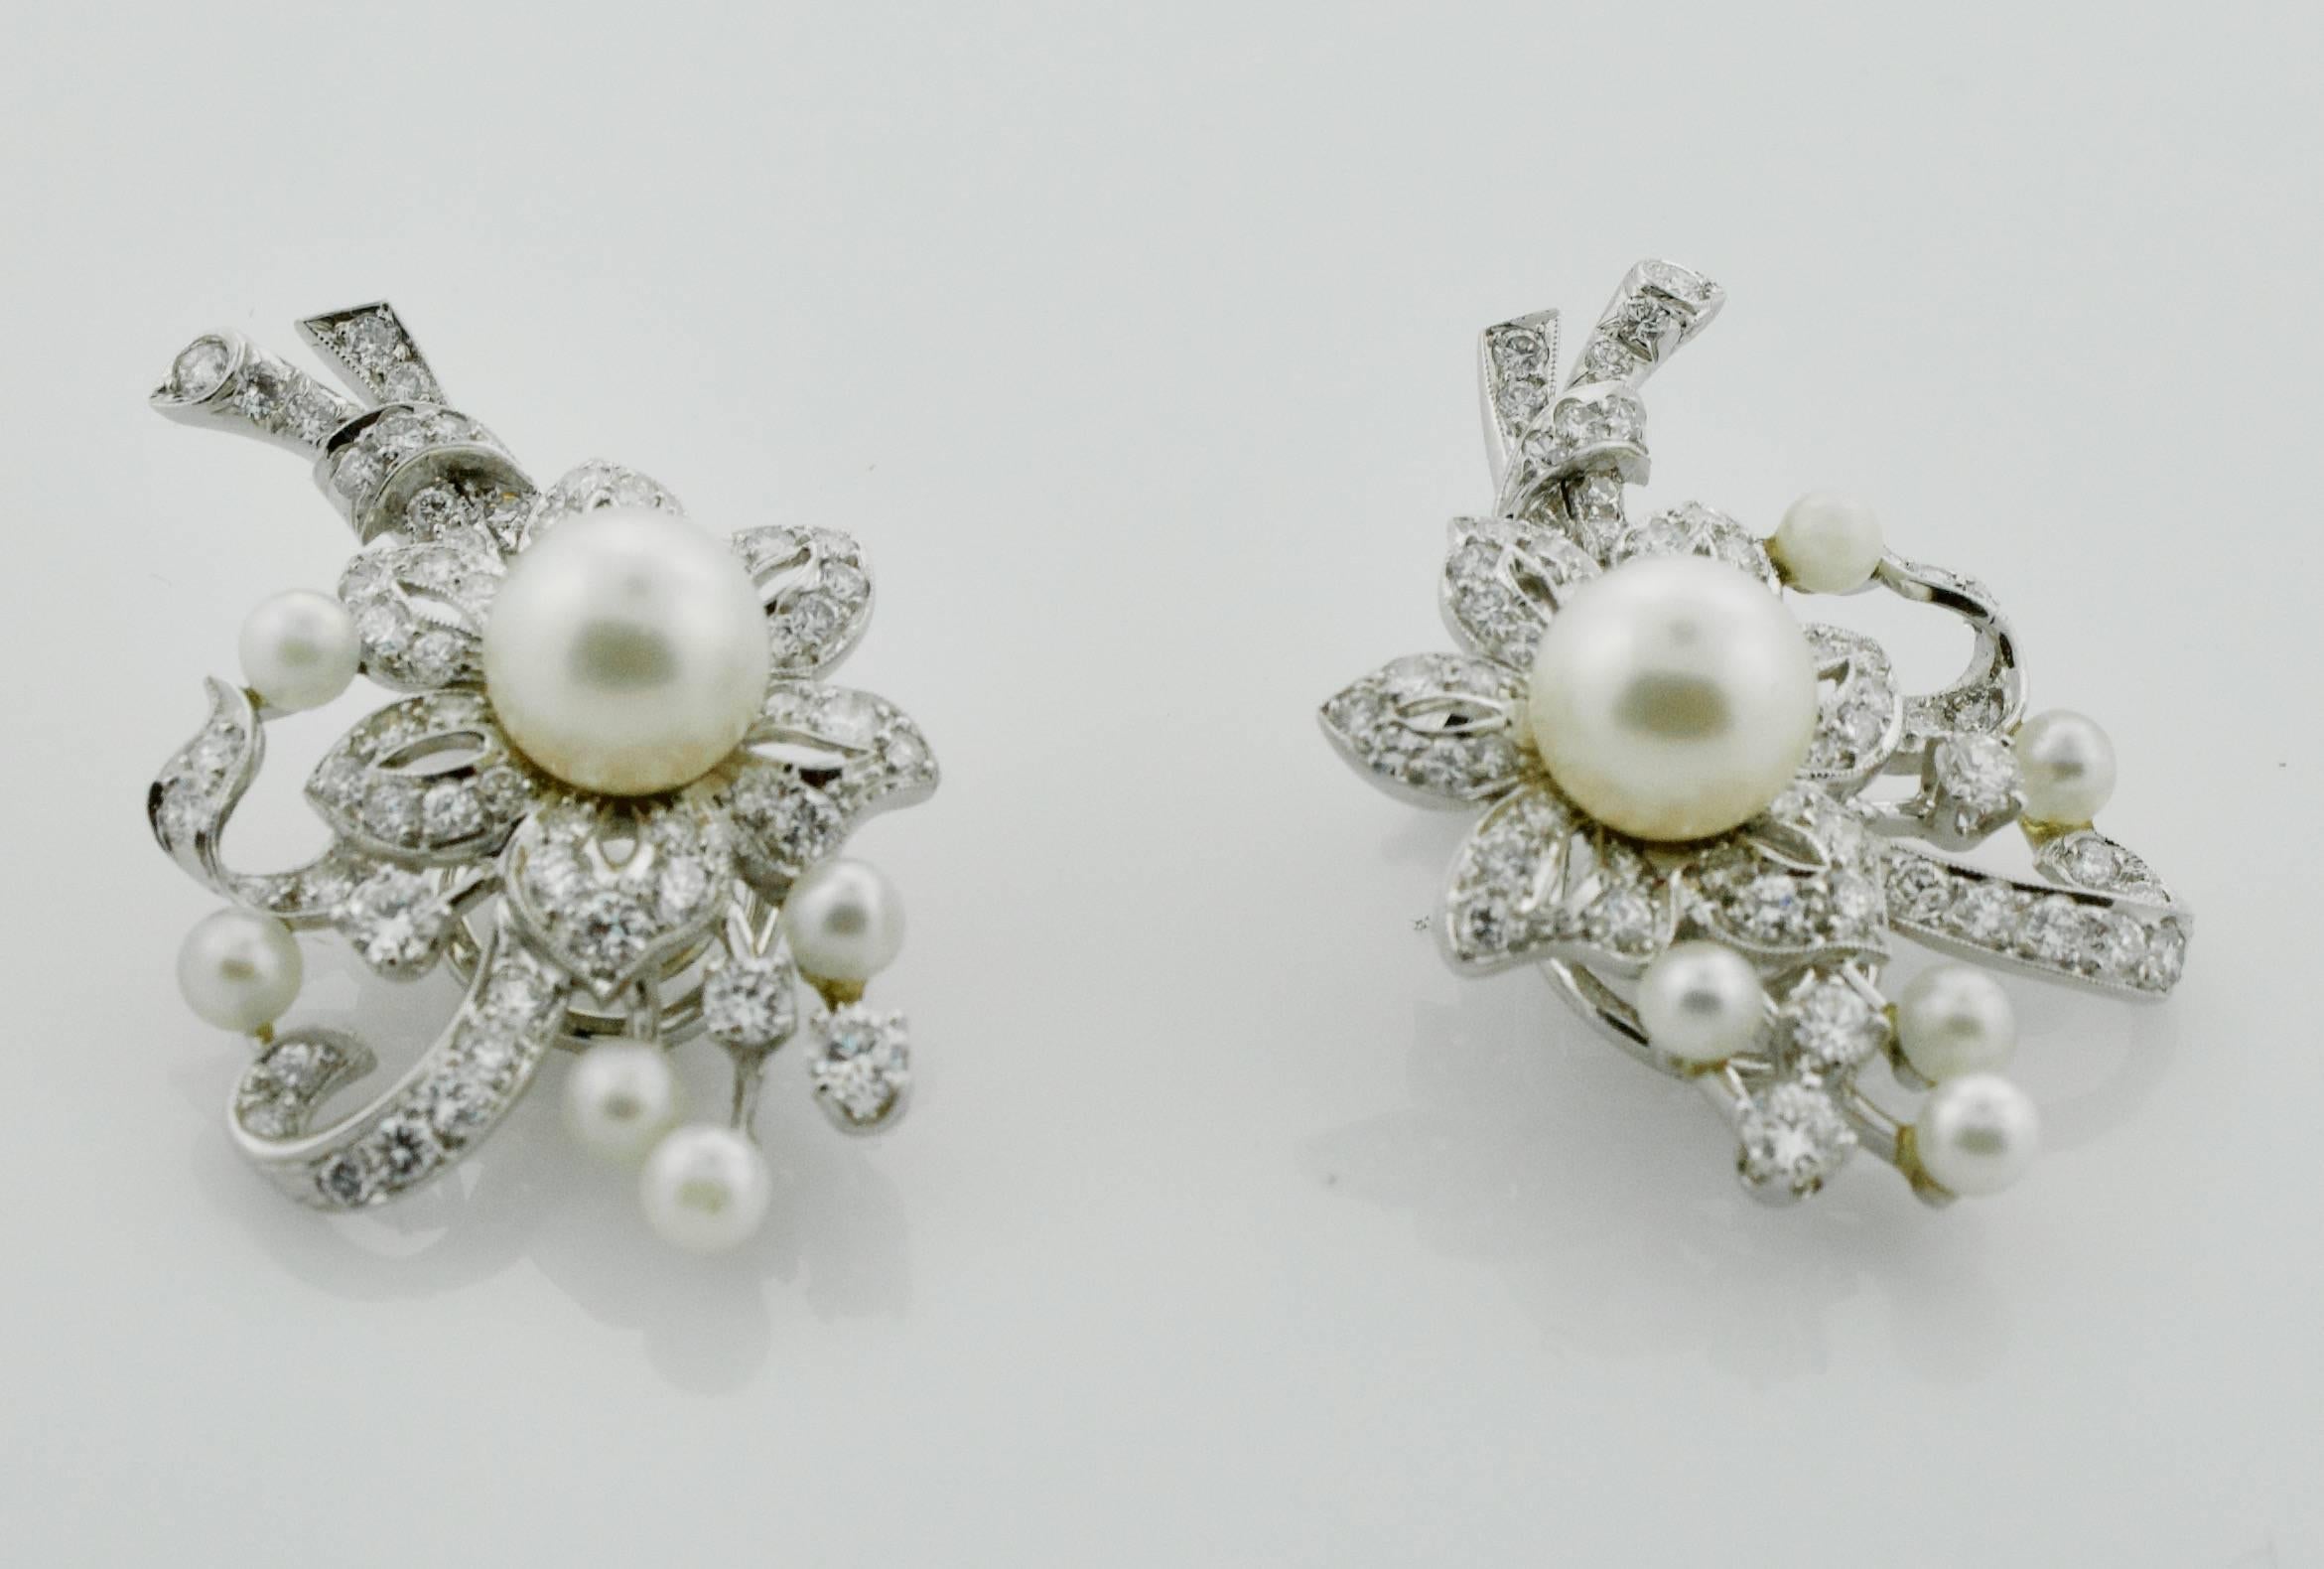 1950's Platinum Diamond and Pearl Handmade Earrings
Twelve Round Pearls Center Pearls 7.9 mm
One Hundred and Twenty Round Brilliant Cut Diamonds weighing 4.00 carats approximately GH VVS-VS
Beautifully Made by a Master Jeweler of The Day.  Clip